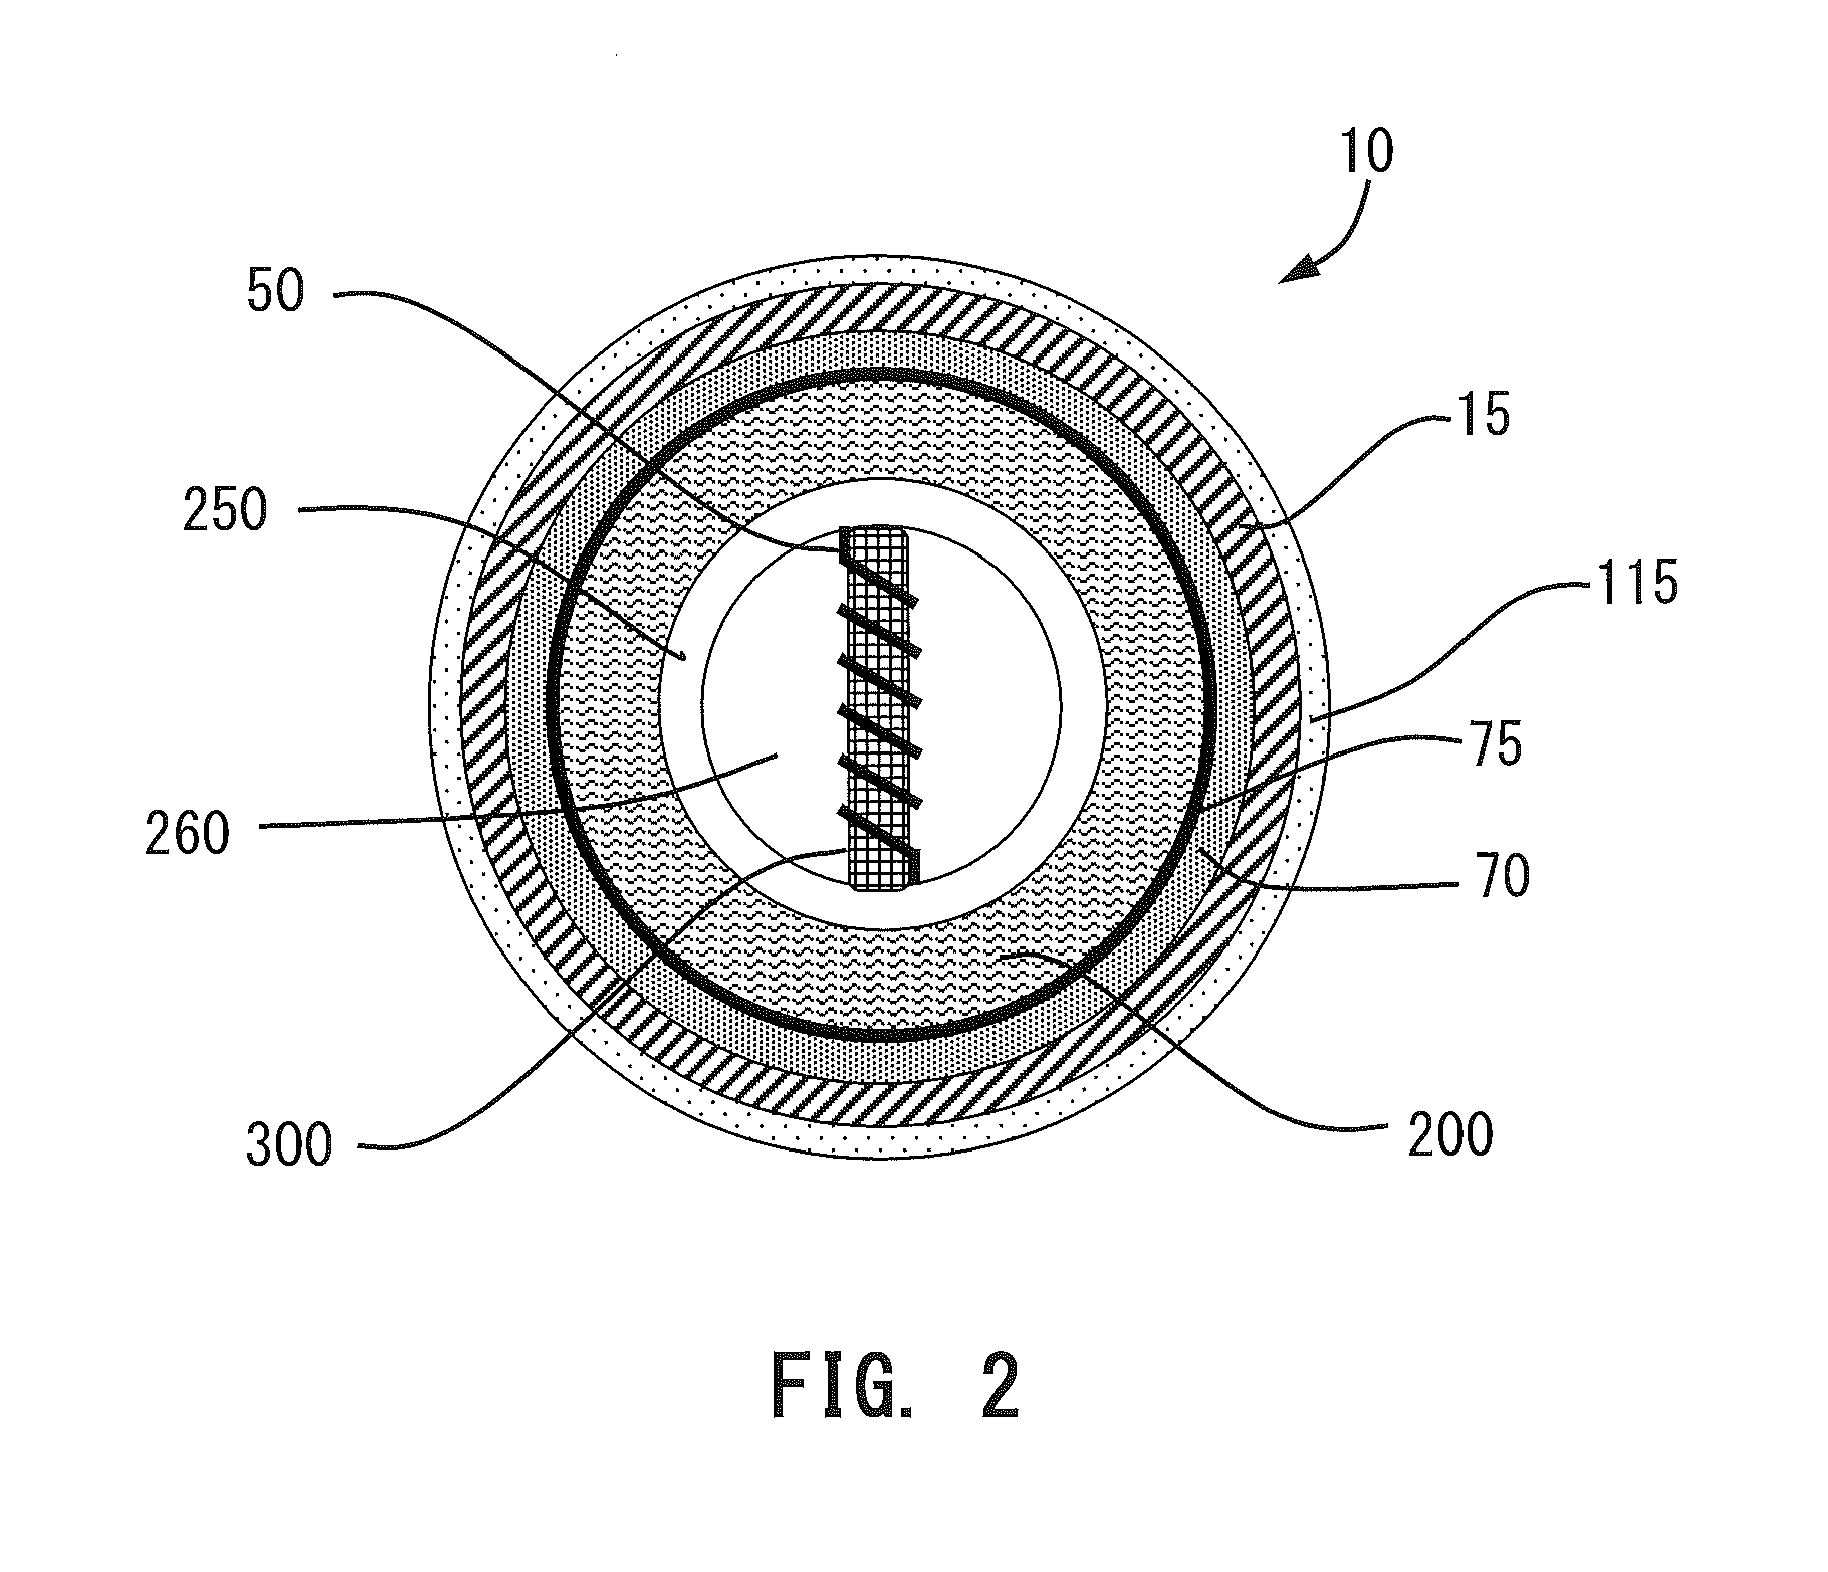 Reservoir and heater system for controllable delivery of multiple aerosolizable materials in an electronic smoking article